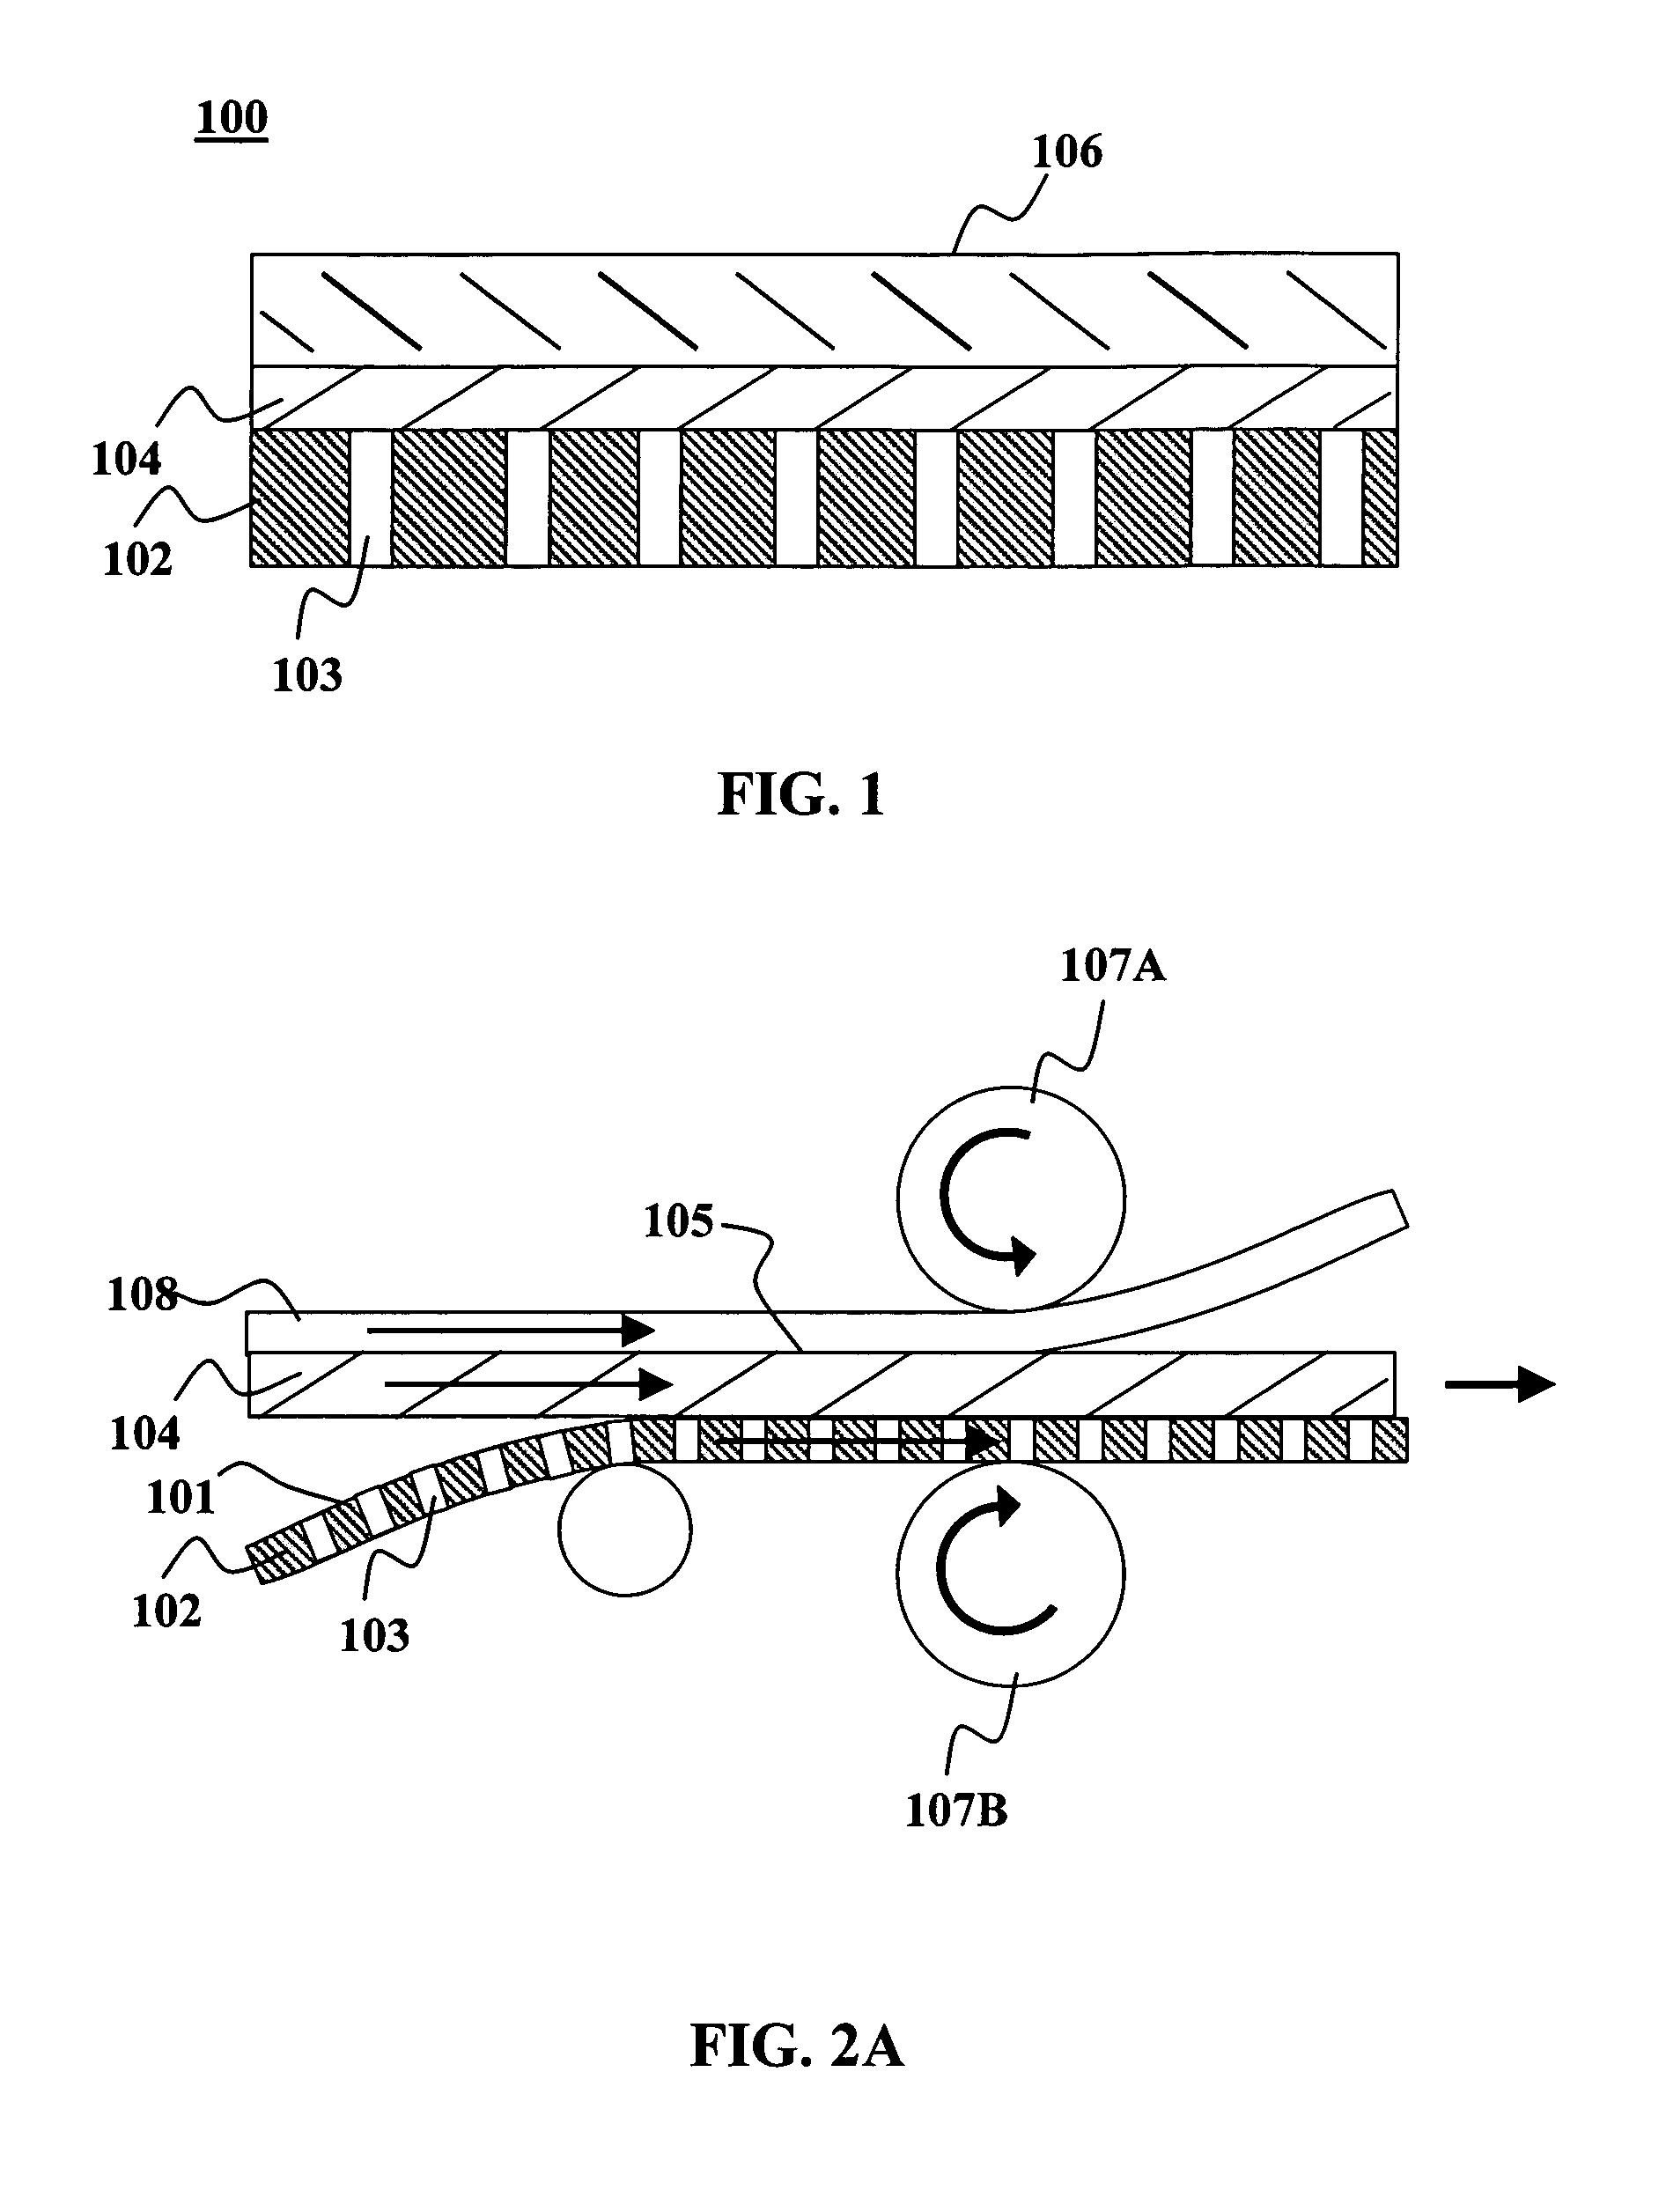 Device transfer techniques for thin film optoelectronic devices